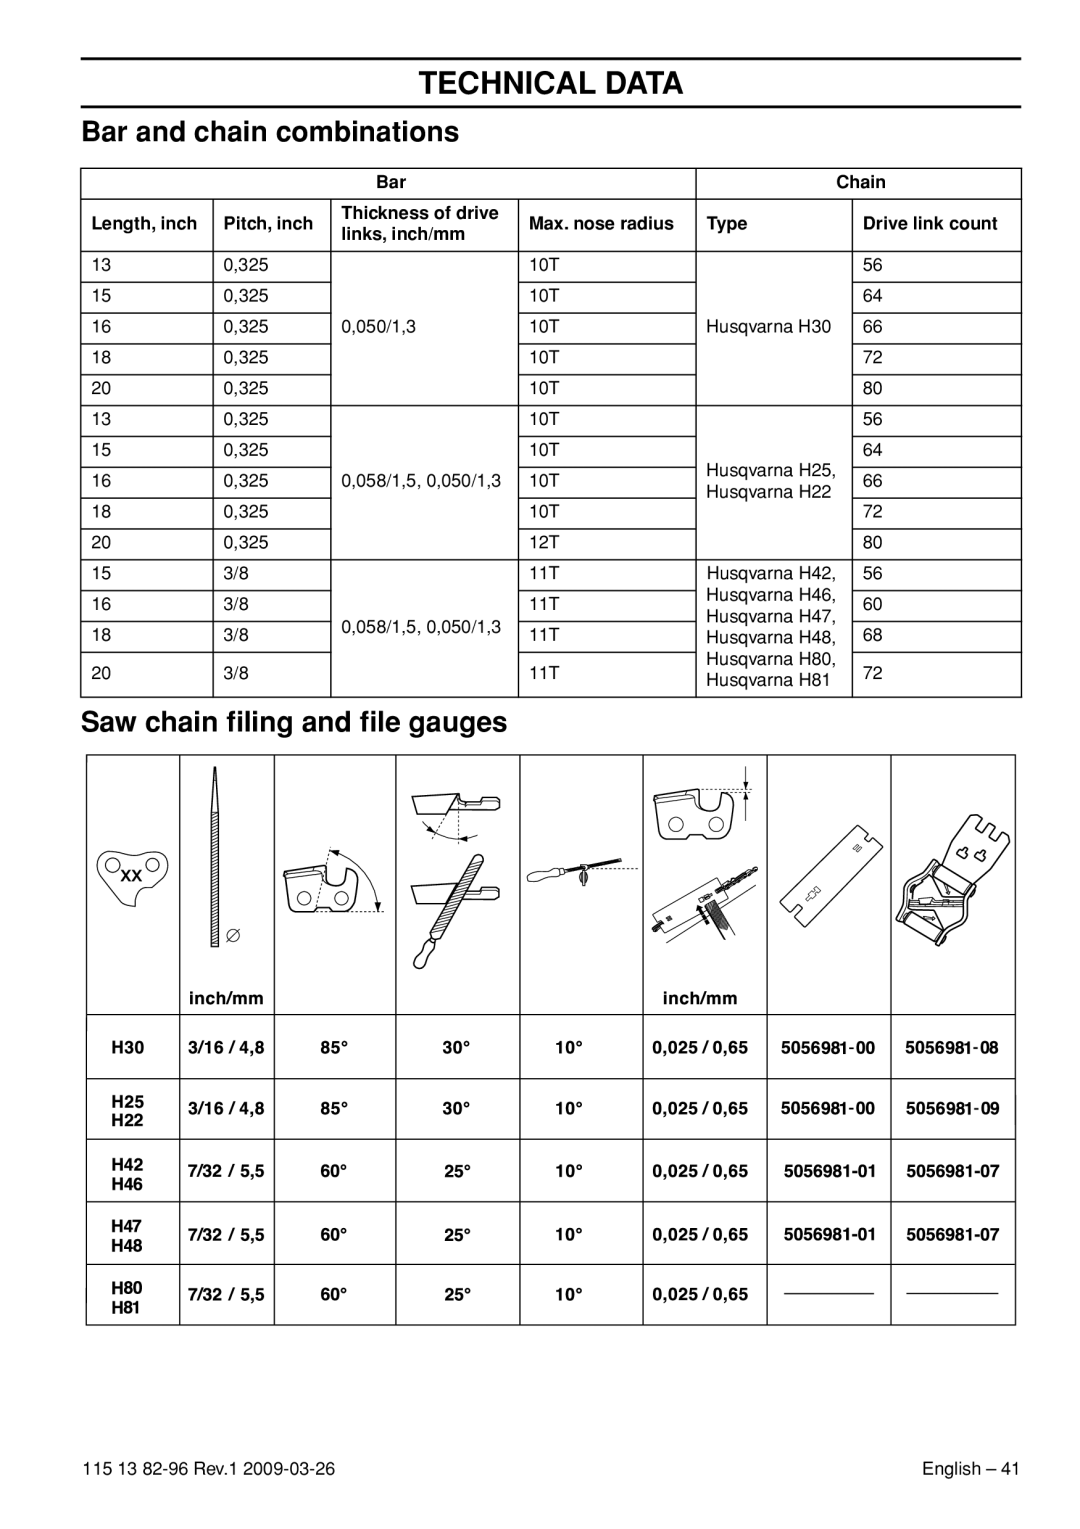 Husqvarna 115 13 82-96 Bar and chain combinations, Saw chain ﬁling and ﬁle gauges, Length, inch, Pitch, inch, Type, Chain 